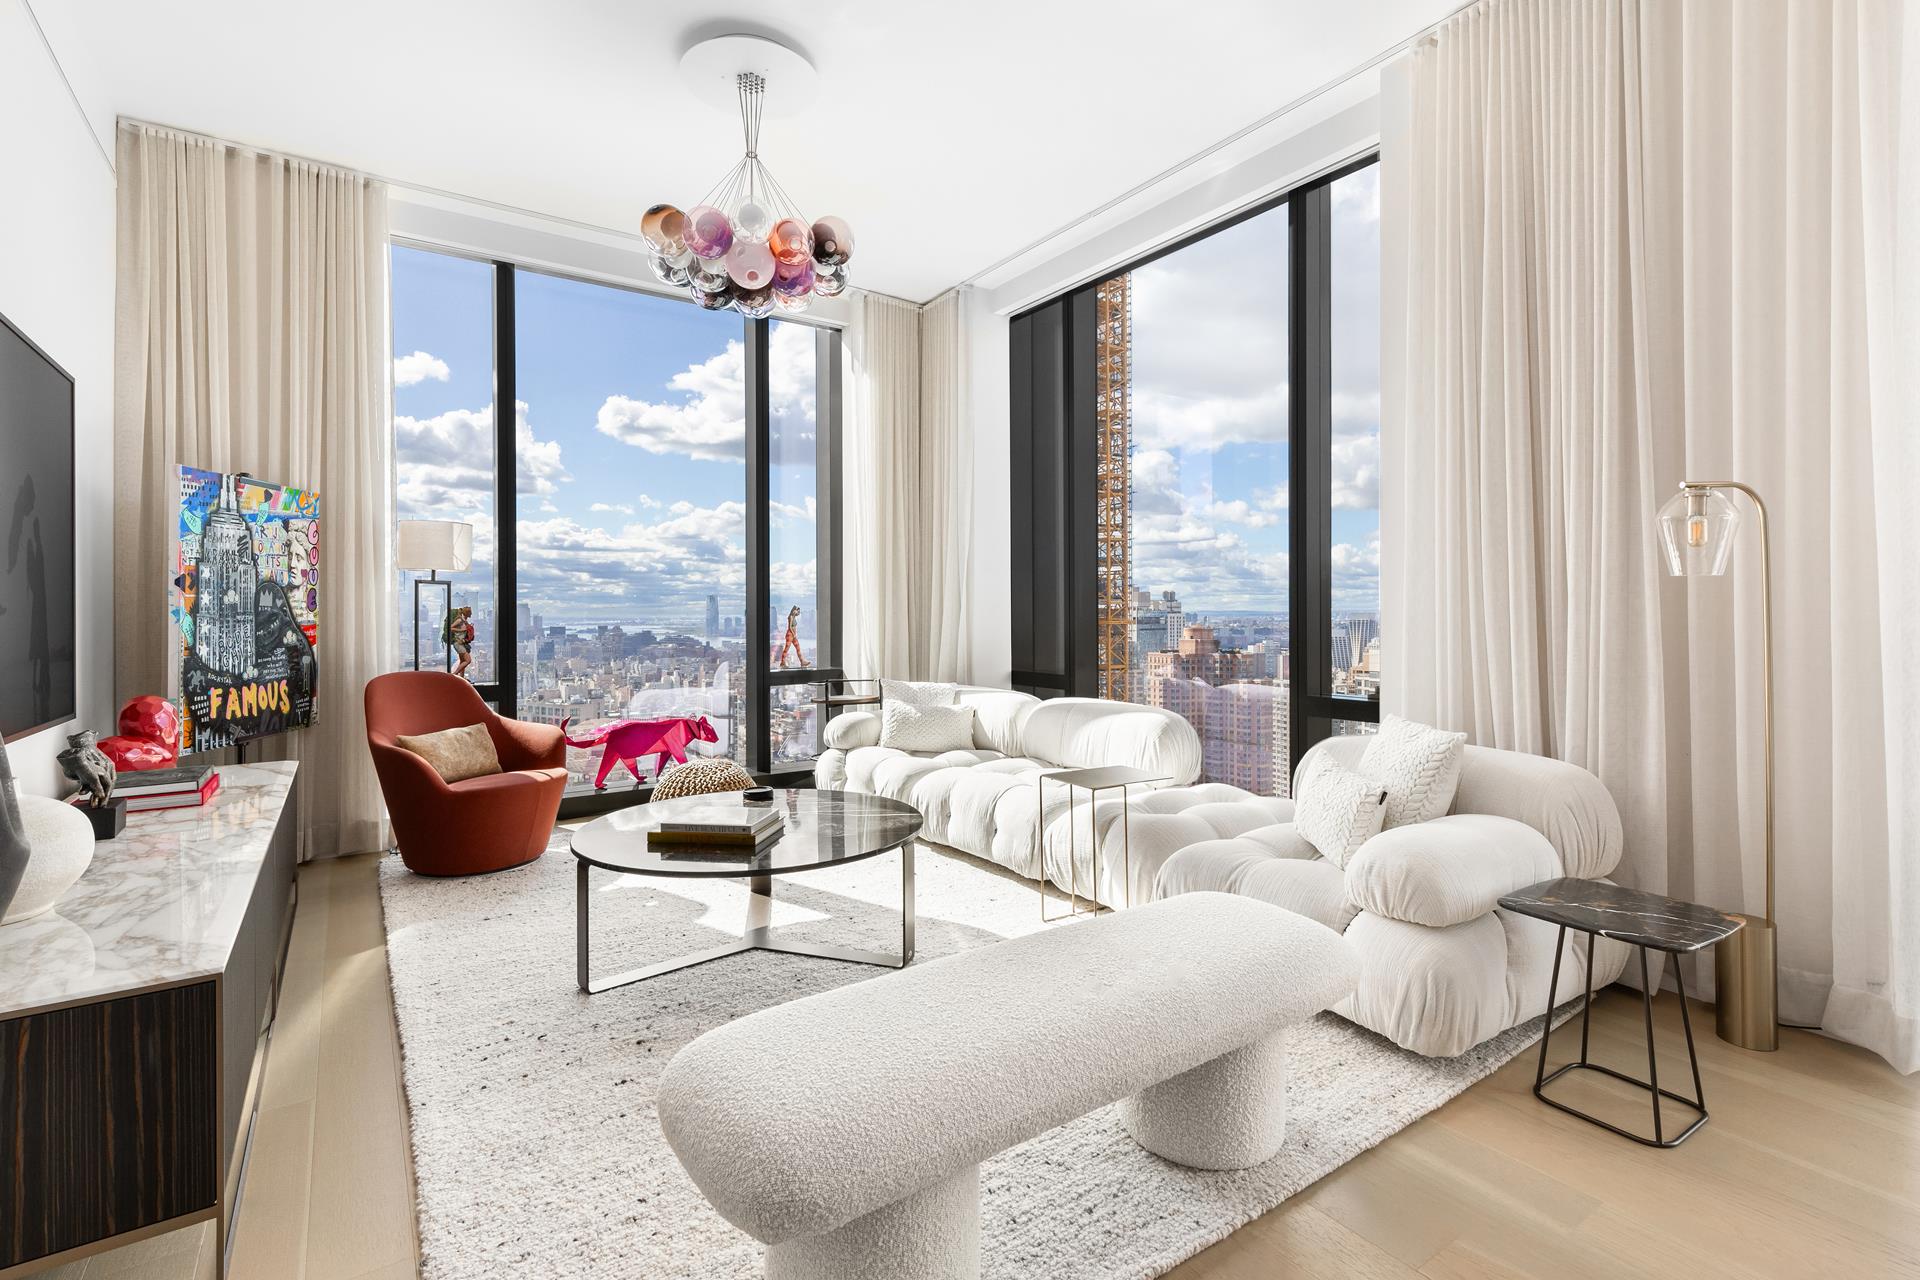 277 5th Avenue 41C, Nomad, Downtown, NYC - 2 Bedrooms  
2.5 Bathrooms  
4 Rooms - 